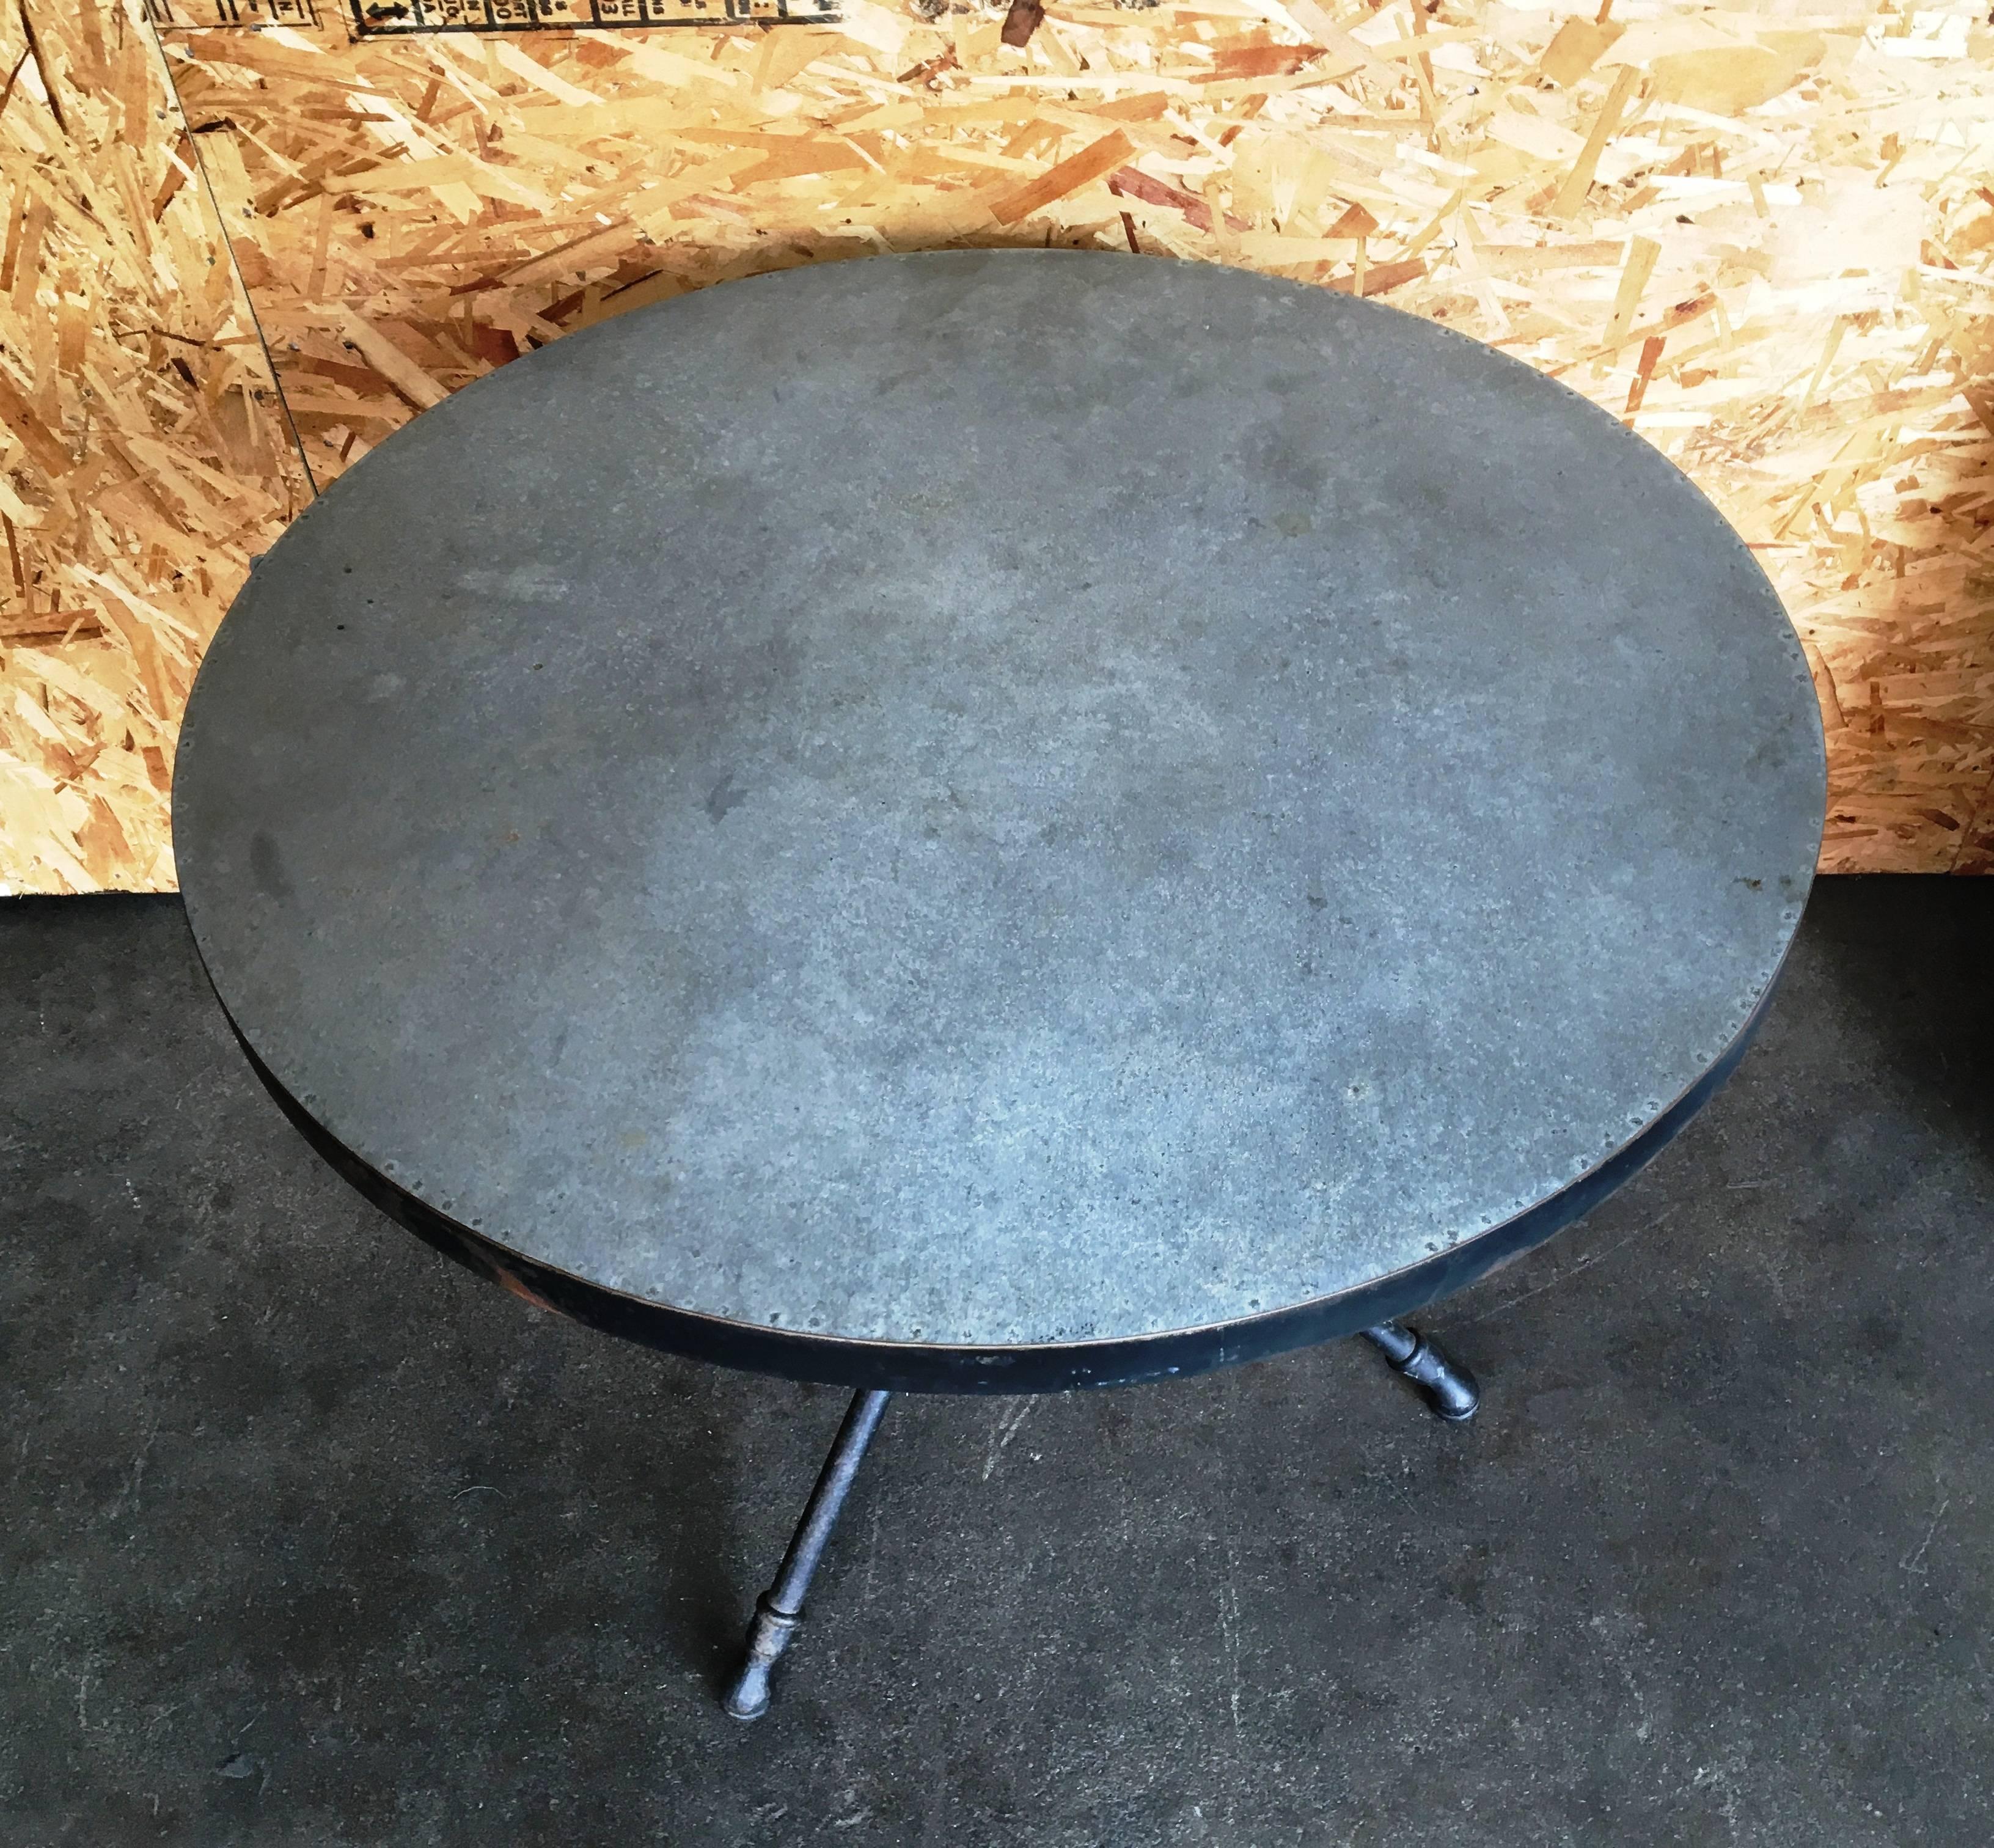 Three-leg metal table base with a poured concrete top.